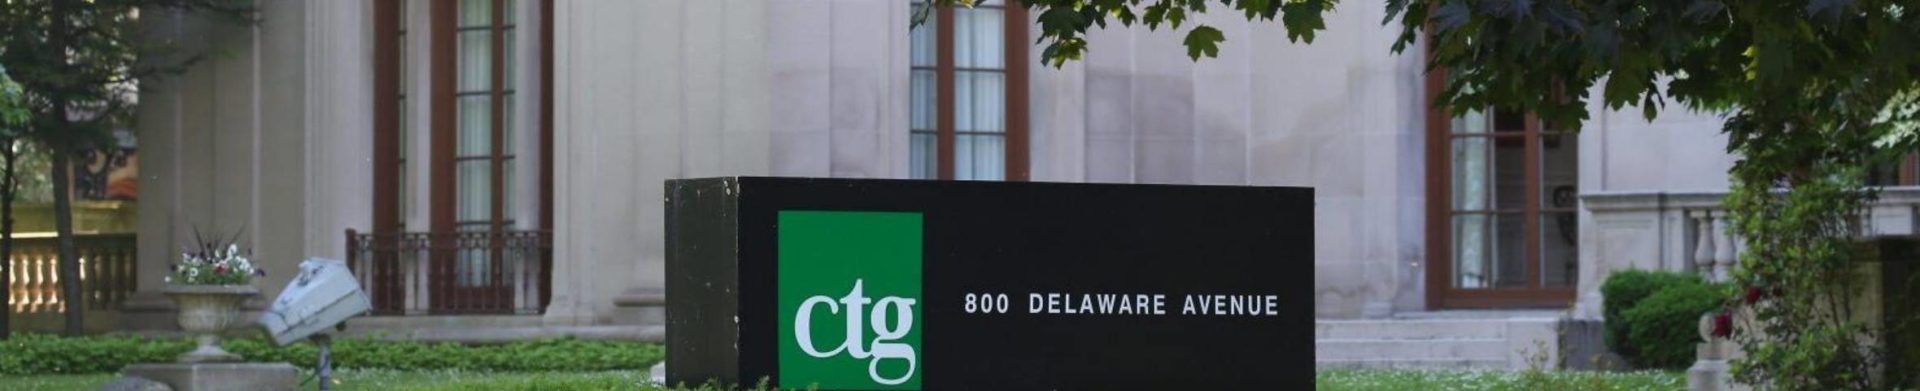 the ctg building